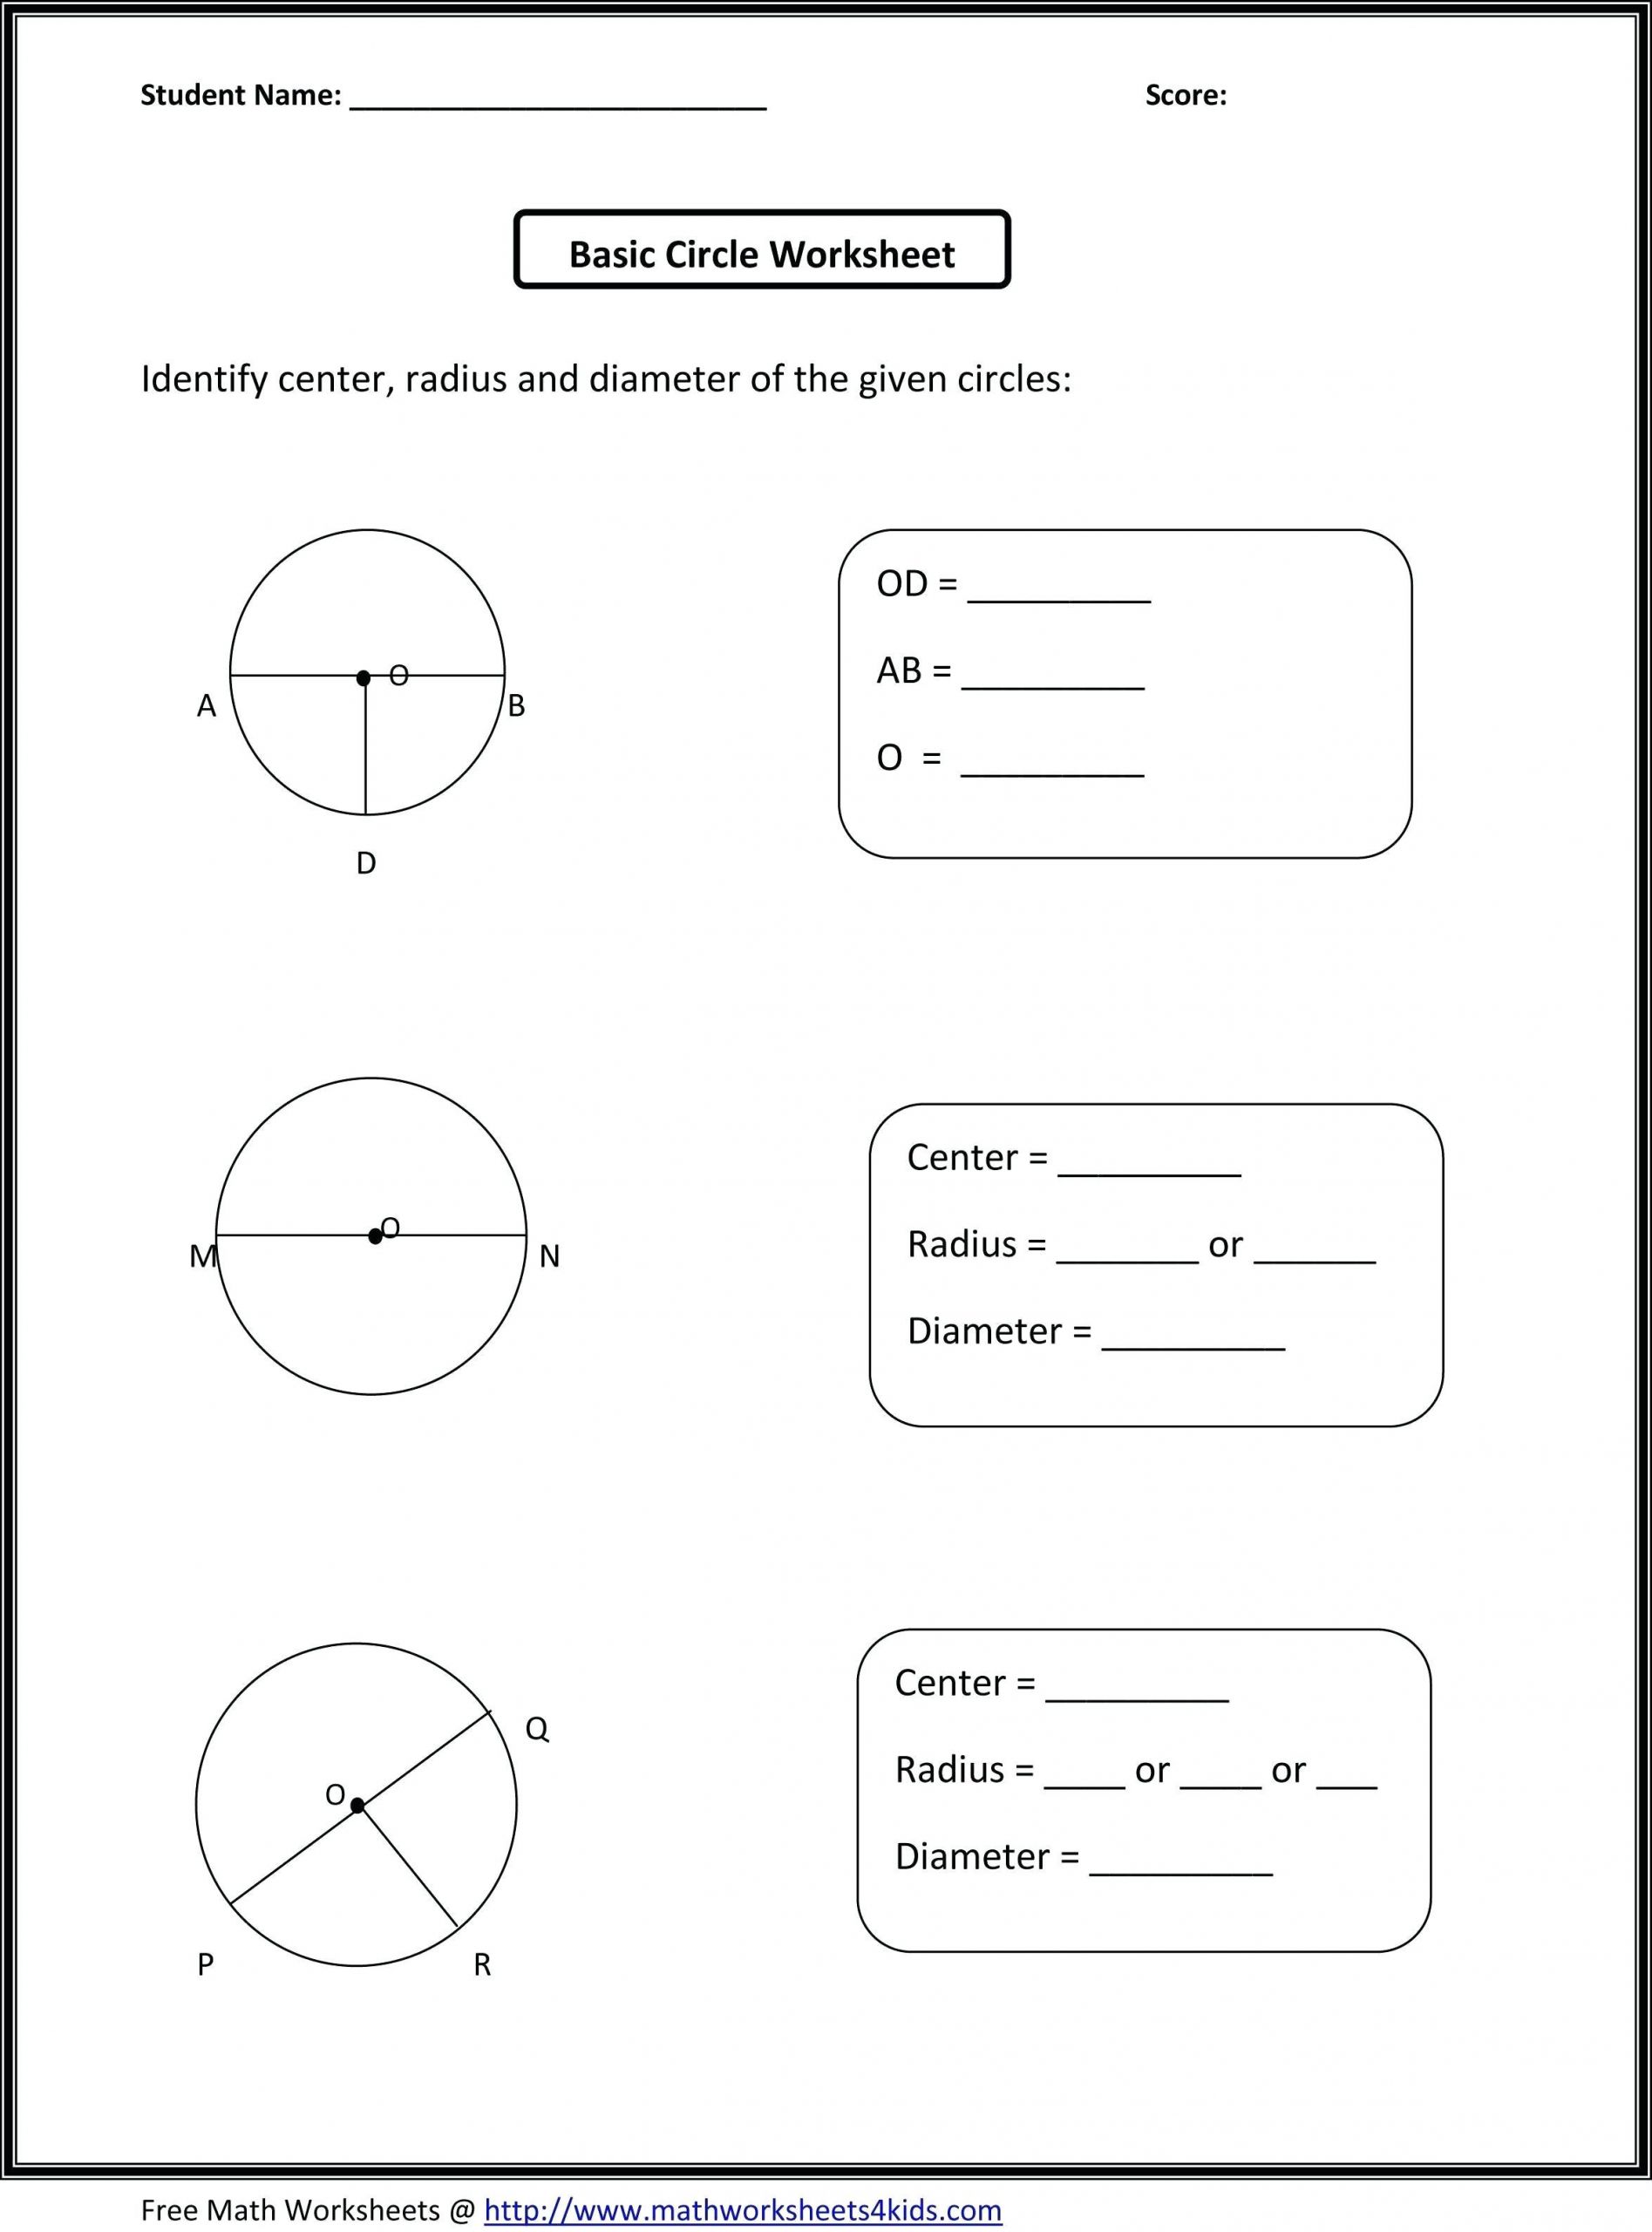 Free Math Worksheets Second Grade 2 Subtraction Subtracting 1 Digit From 2 Digit with Regrouping